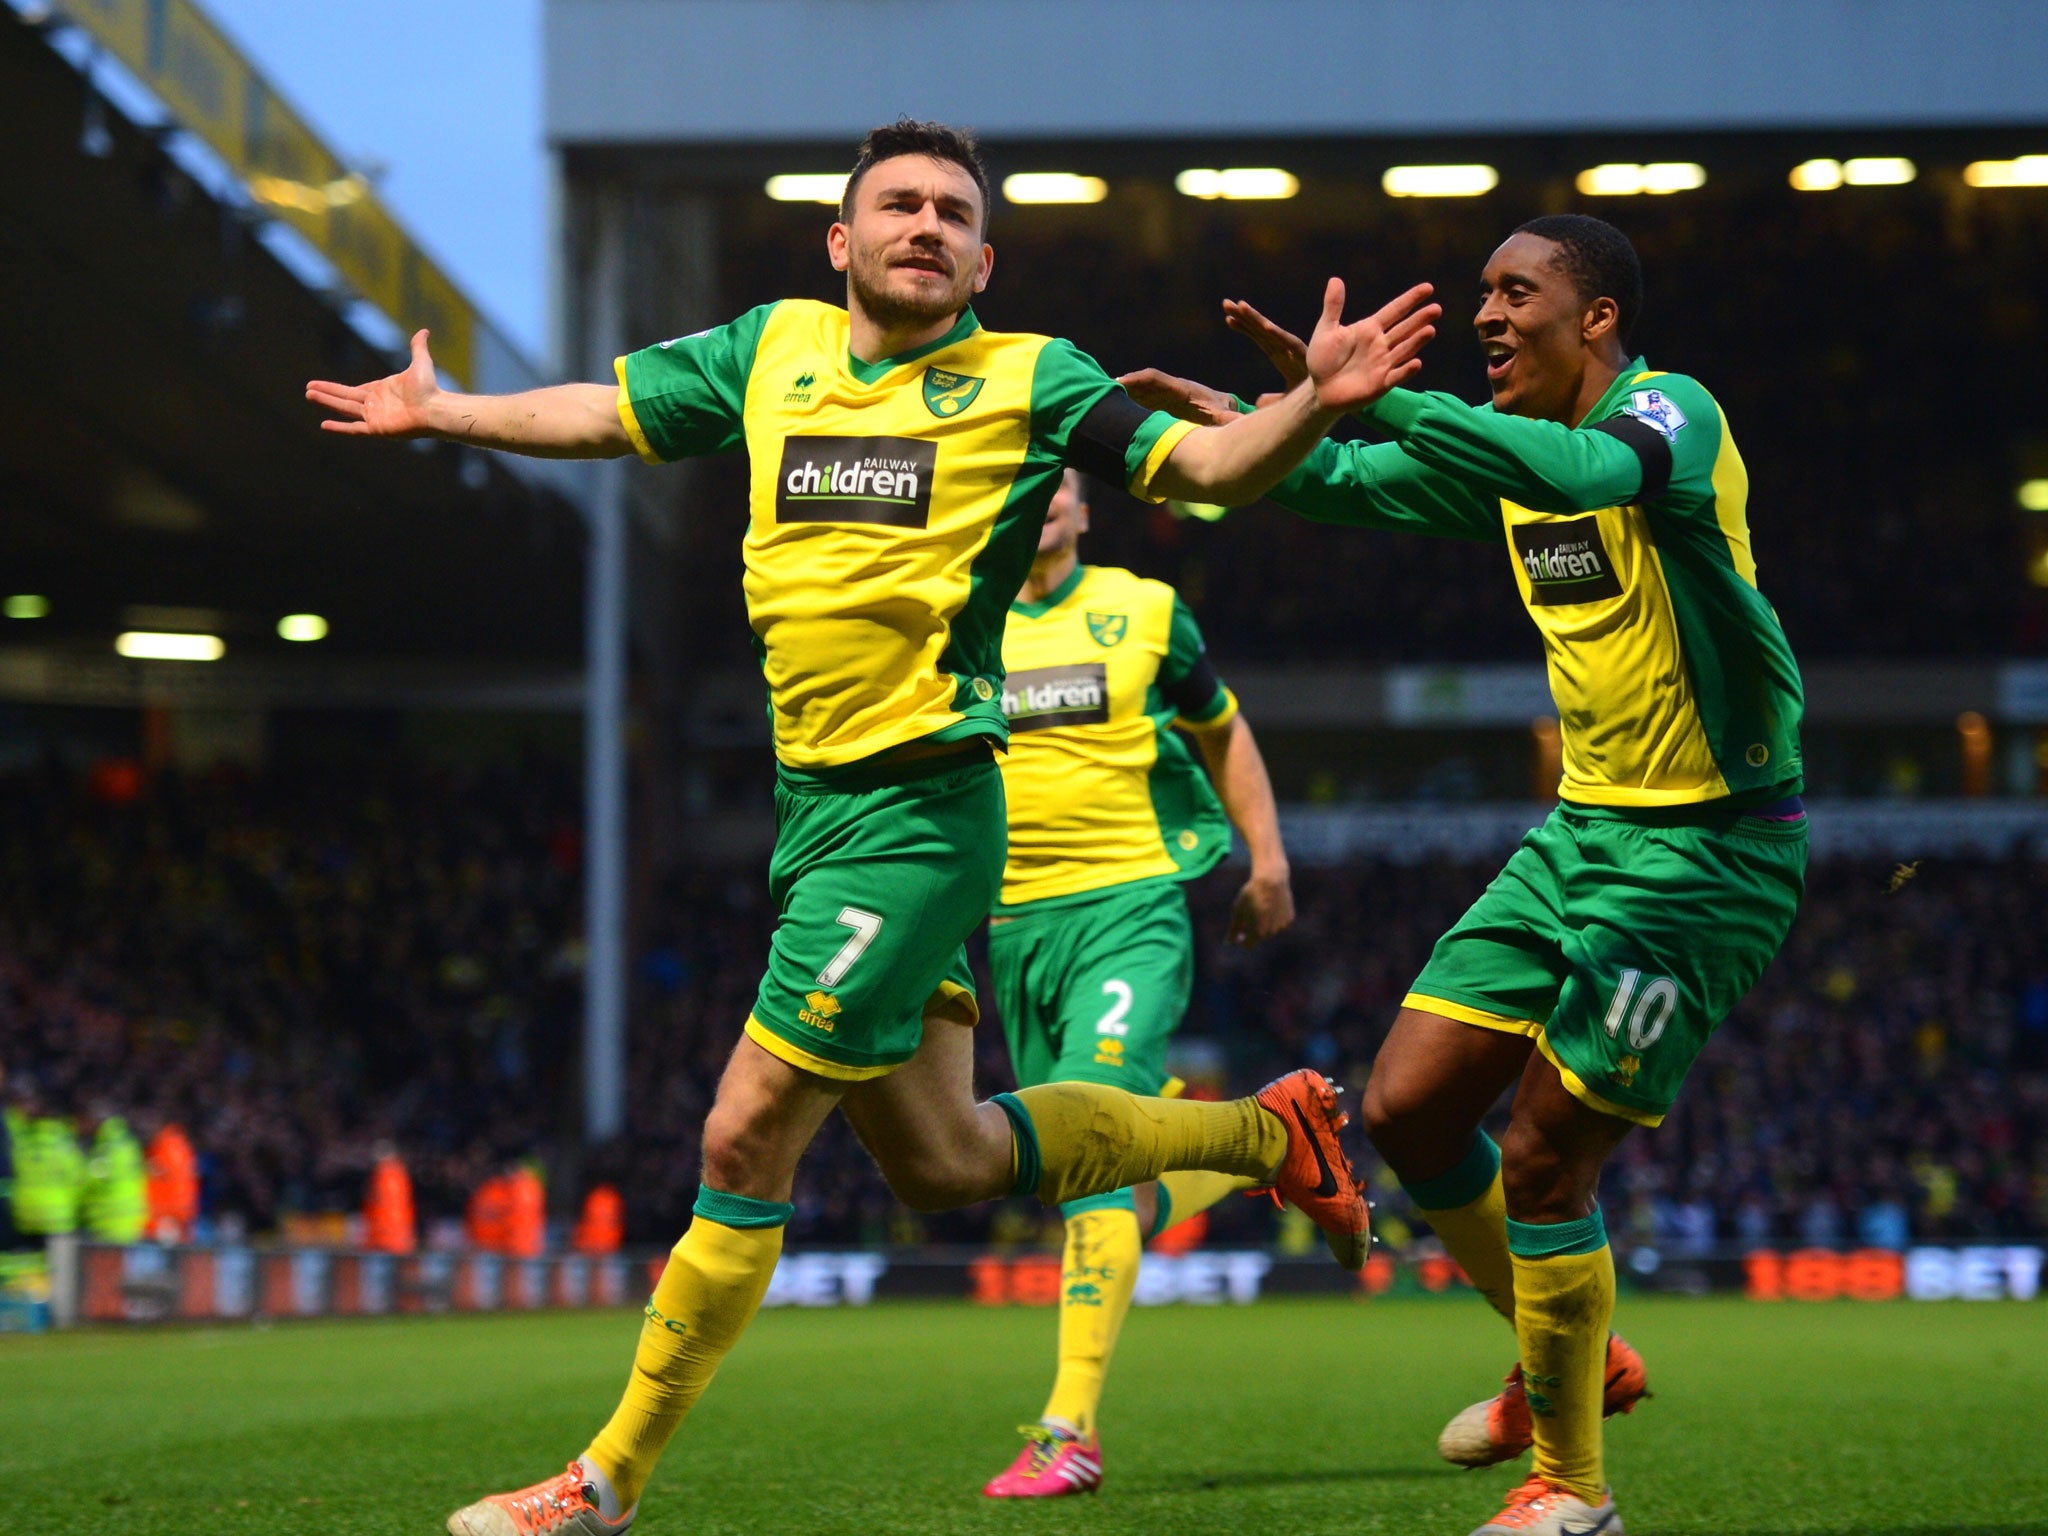 Robert Snodgrass (left) celebrates a winning goal for Norwichwith Leroy Fey